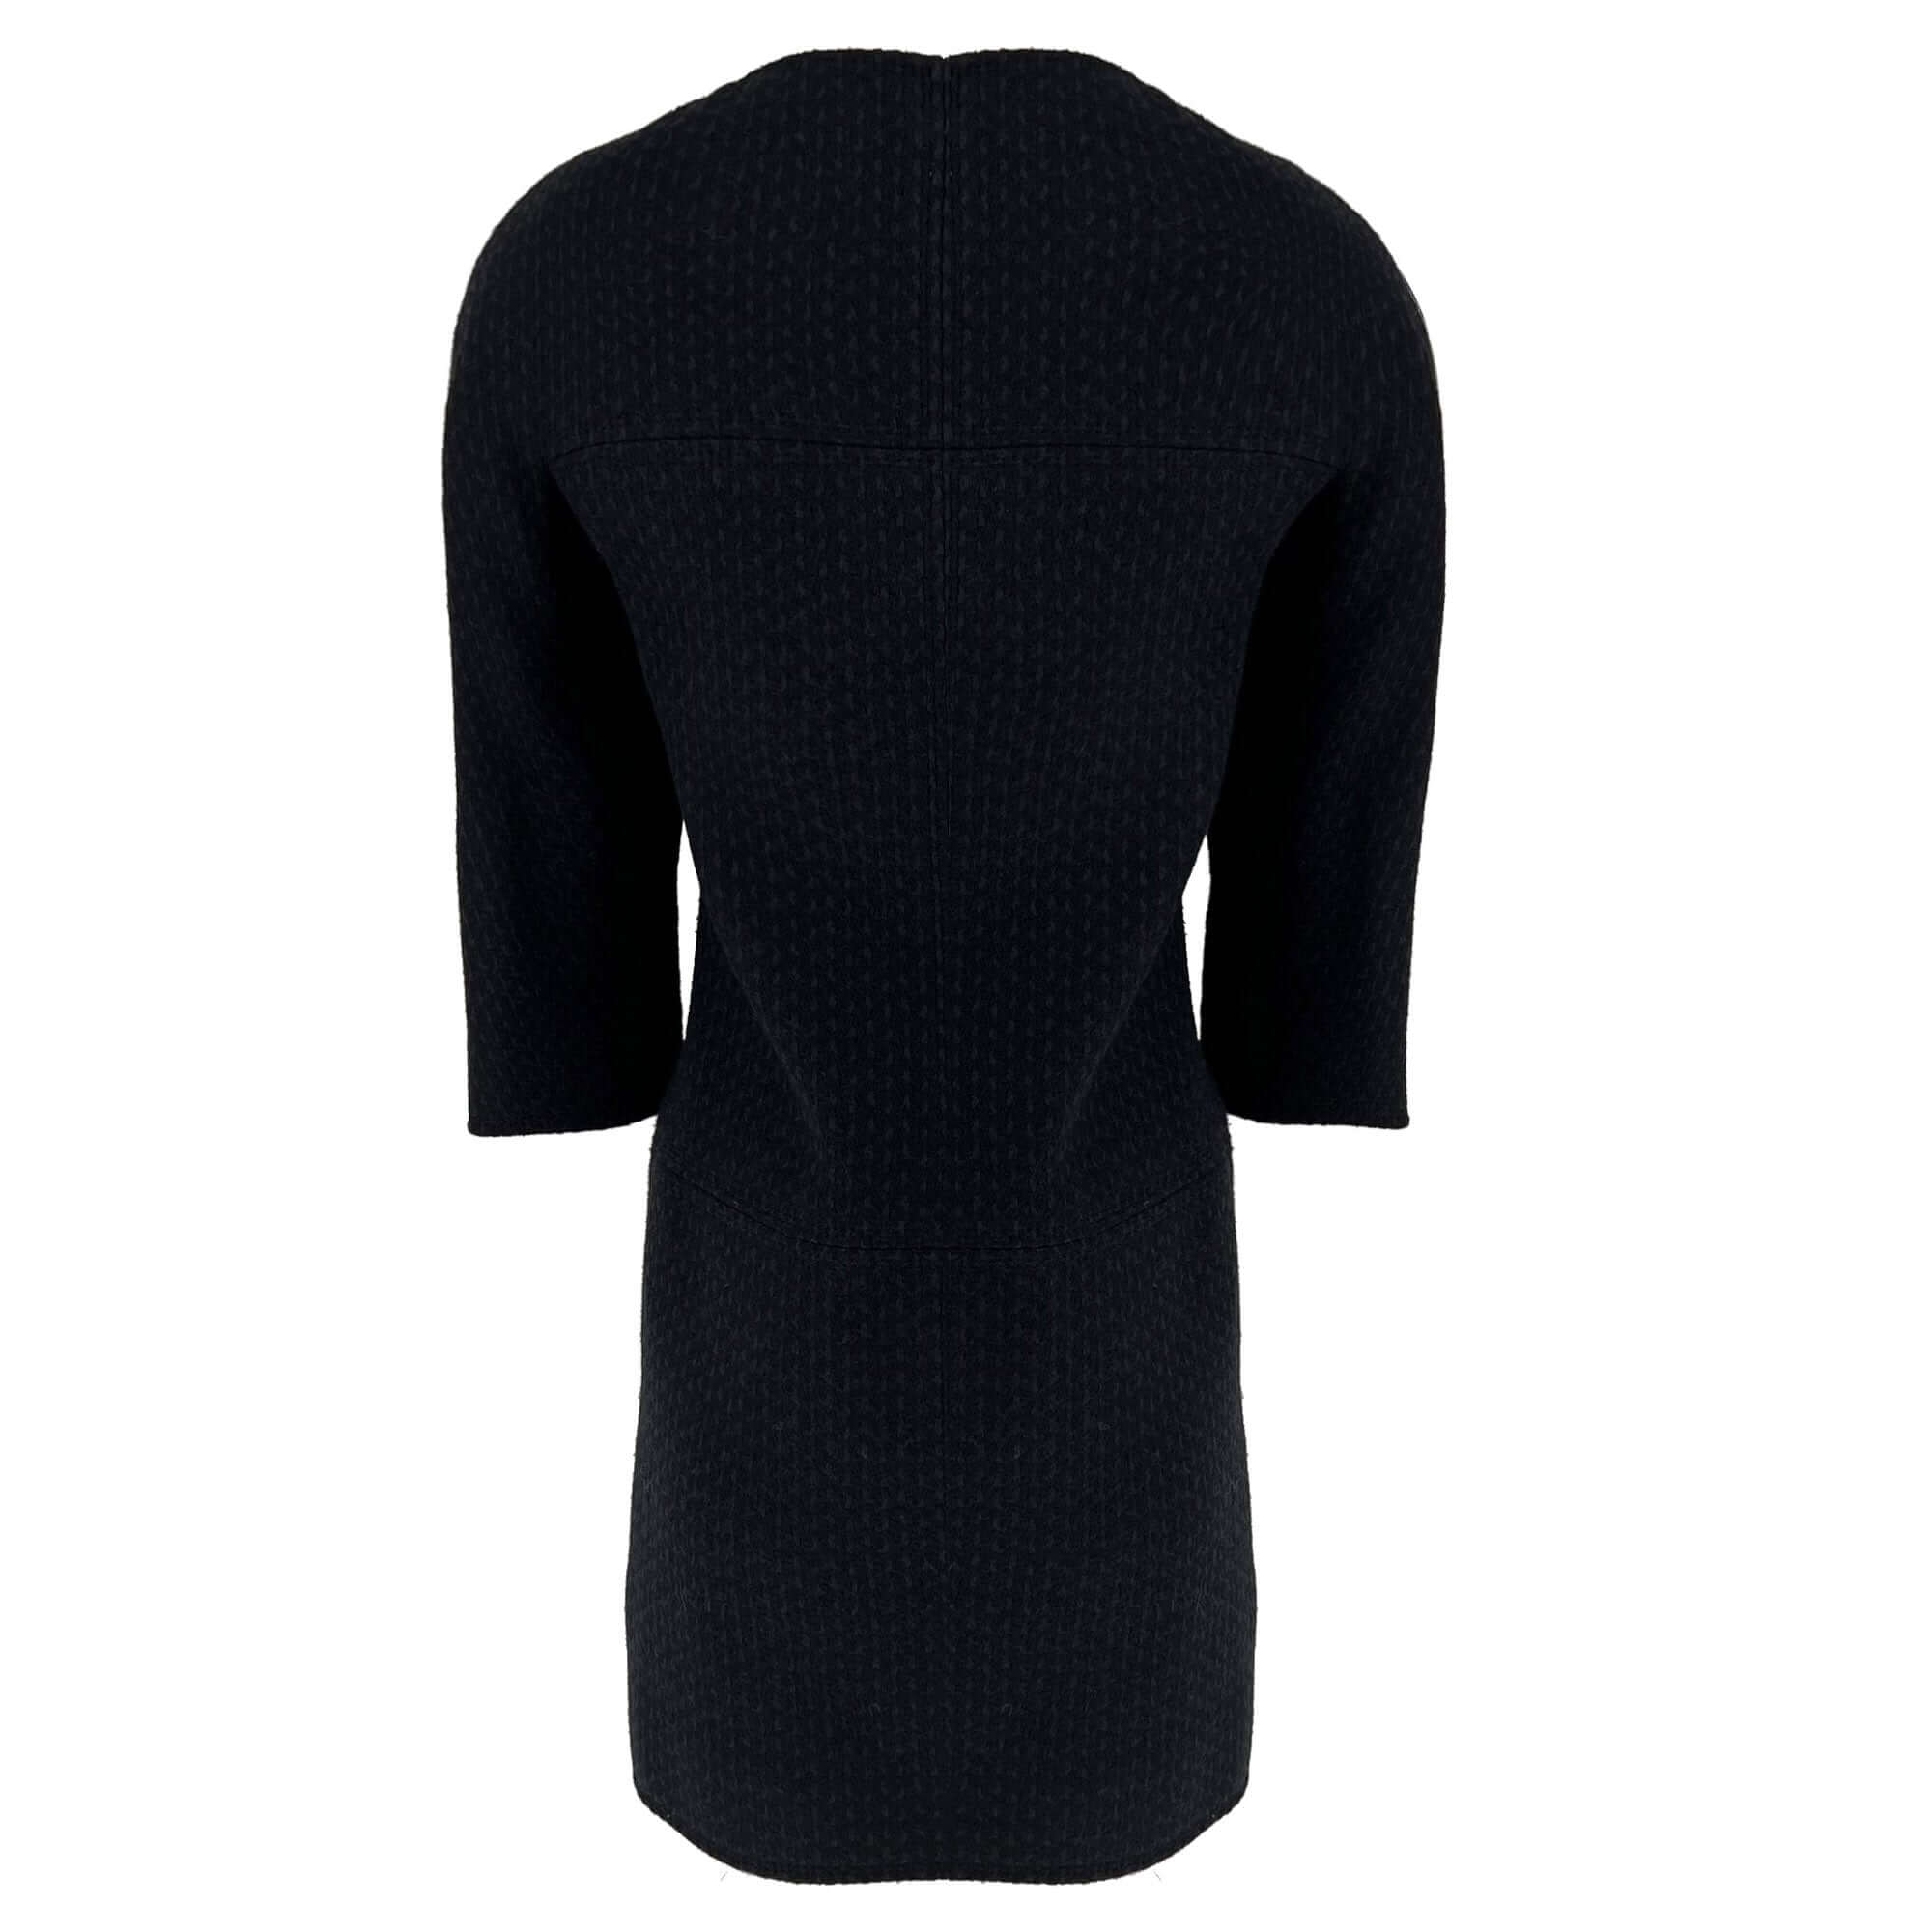 Chanel wool navy and black coat/dress